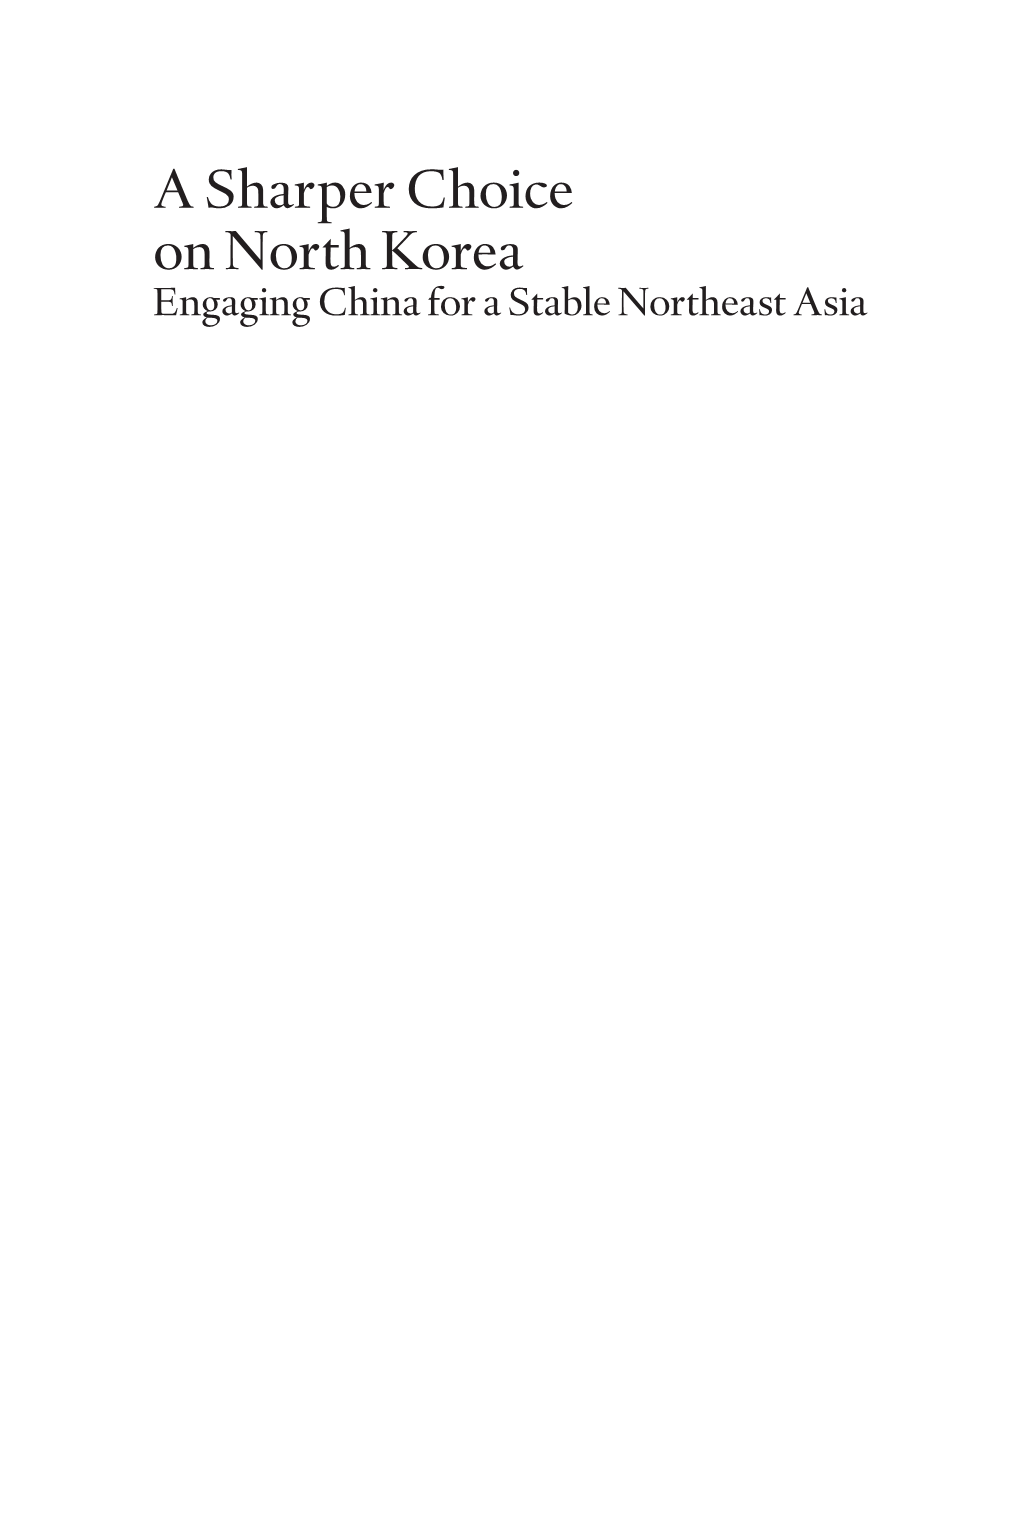 A Sharper Choice on North Korea Engaging China for a Stable Northeast Asia